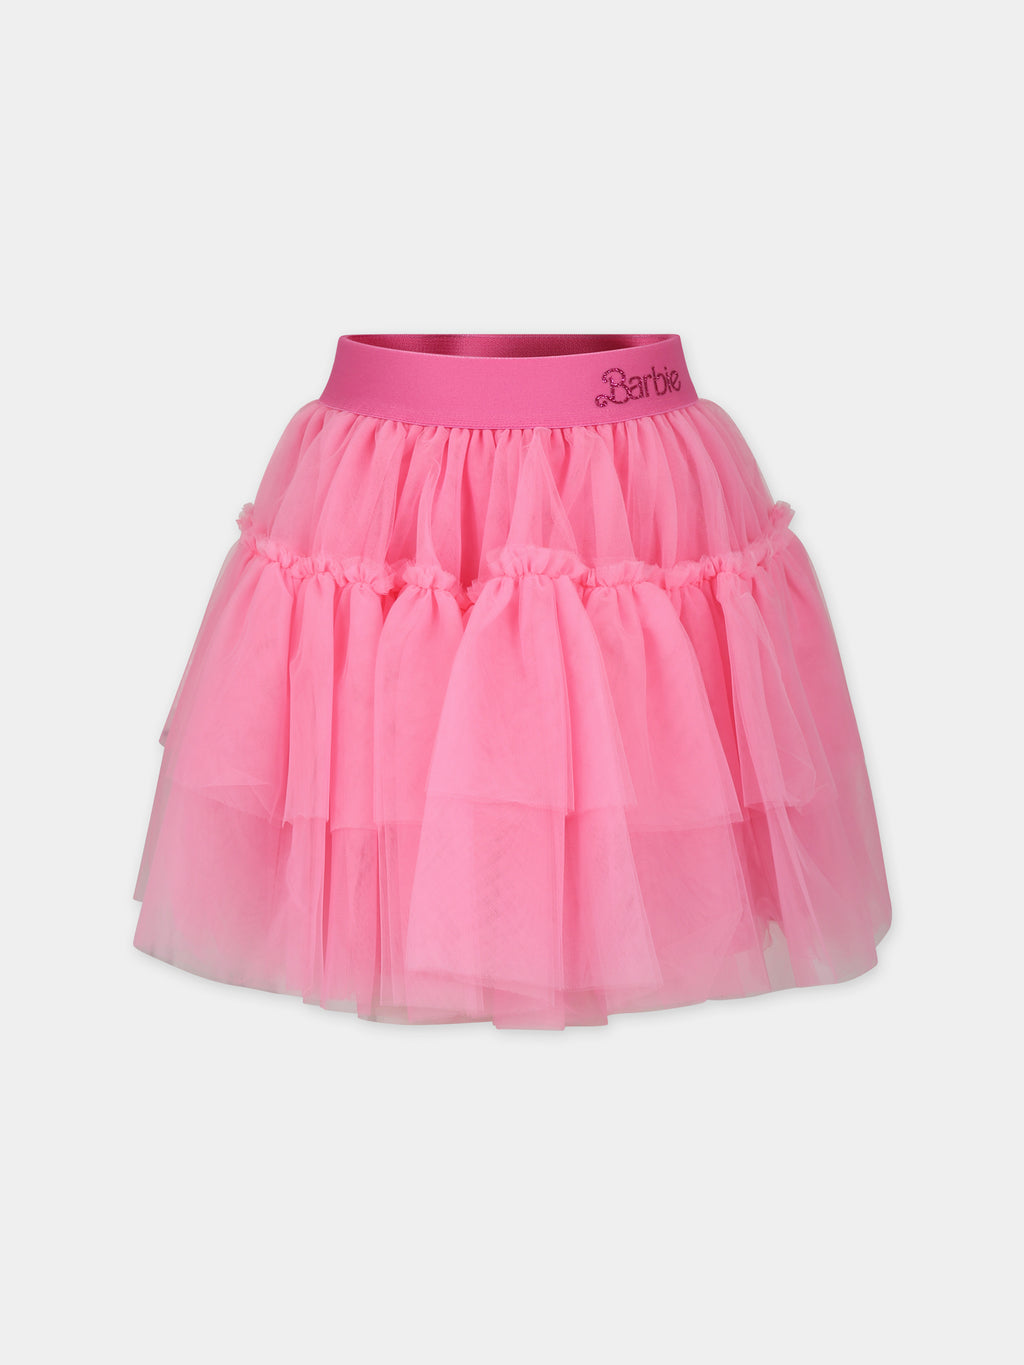 Pink skirt for girl with writing